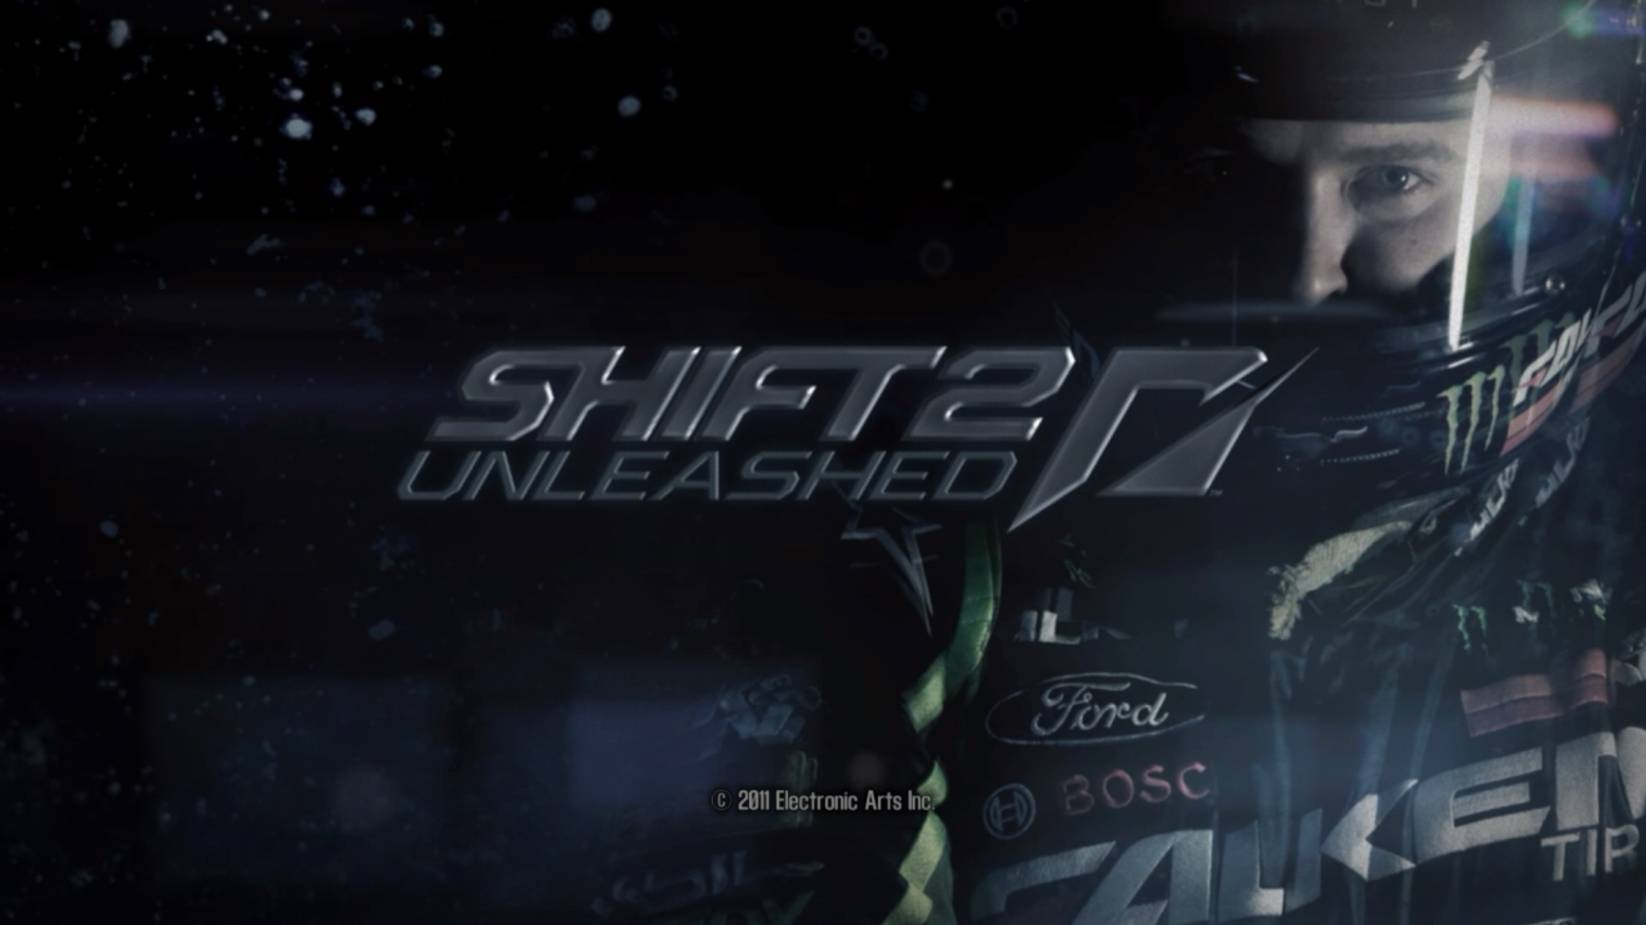 NEED FOR SPEED SHIFT 2 UNLEASHED #18